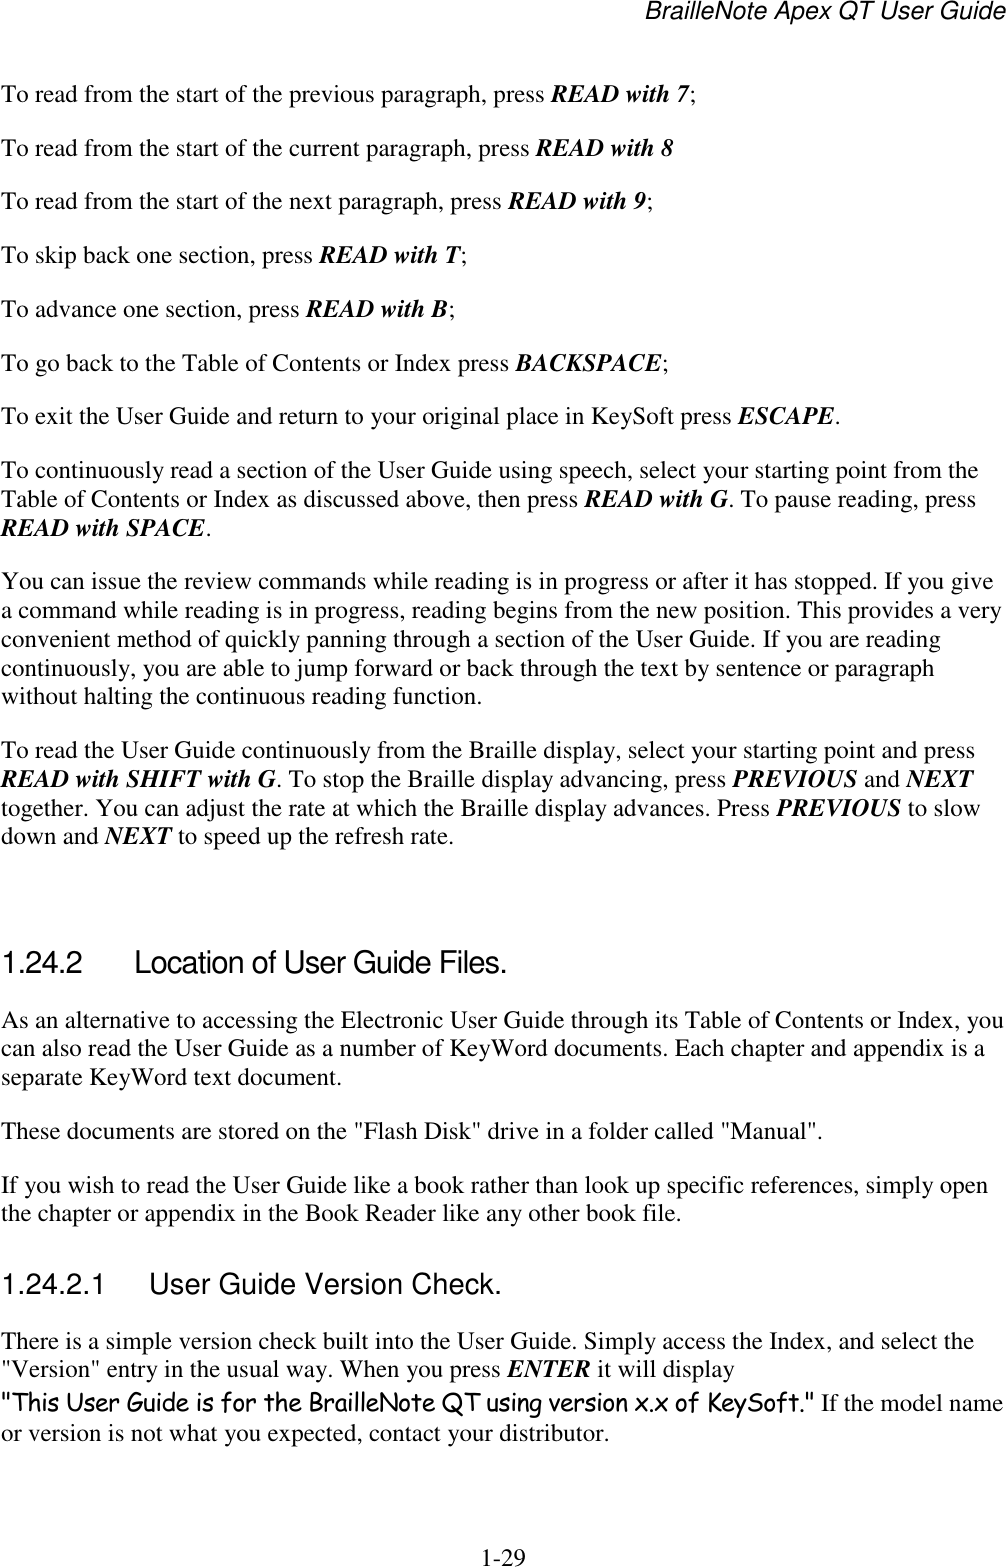 BrailleNote Apex QT User Guide  1-29   To read from the start of the previous paragraph, press READ with 7; To read from the start of the current paragraph, press READ with 8 To read from the start of the next paragraph, press READ with 9; To skip back one section, press READ with T; To advance one section, press READ with B; To go back to the Table of Contents or Index press BACKSPACE; To exit the User Guide and return to your original place in KeySoft press ESCAPE. To continuously read a section of the User Guide using speech, select your starting point from the Table of Contents or Index as discussed above, then press READ with G. To pause reading, press READ with SPACE. You can issue the review commands while reading is in progress or after it has stopped. If you give a command while reading is in progress, reading begins from the new position. This provides a very convenient method of quickly panning through a section of the User Guide. If you are reading continuously, you are able to jump forward or back through the text by sentence or paragraph without halting the continuous reading function. To read the User Guide continuously from the Braille display, select your starting point and press READ with SHIFT with G. To stop the Braille display advancing, press PREVIOUS and NEXT together. You can adjust the rate at which the Braille display advances. Press PREVIOUS to slow down and NEXT to speed up the refresh rate.   1.24.2  Location of User Guide Files. As an alternative to accessing the Electronic User Guide through its Table of Contents or Index, you can also read the User Guide as a number of KeyWord documents. Each chapter and appendix is a separate KeyWord text document.  These documents are stored on the &quot;Flash Disk&quot; drive in a folder called &quot;Manual&quot;. If you wish to read the User Guide like a book rather than look up specific references, simply open the chapter or appendix in the Book Reader like any other book file.   1.24.2.1  User Guide Version Check. There is a simple version check built into the User Guide. Simply access the Index, and select the &quot;Version&quot; entry in the usual way. When you press ENTER it will display &quot;This User Guide is for the BrailleNote QT using version x.x of KeySoft.&quot; If the model name or version is not what you expected, contact your distributor.   